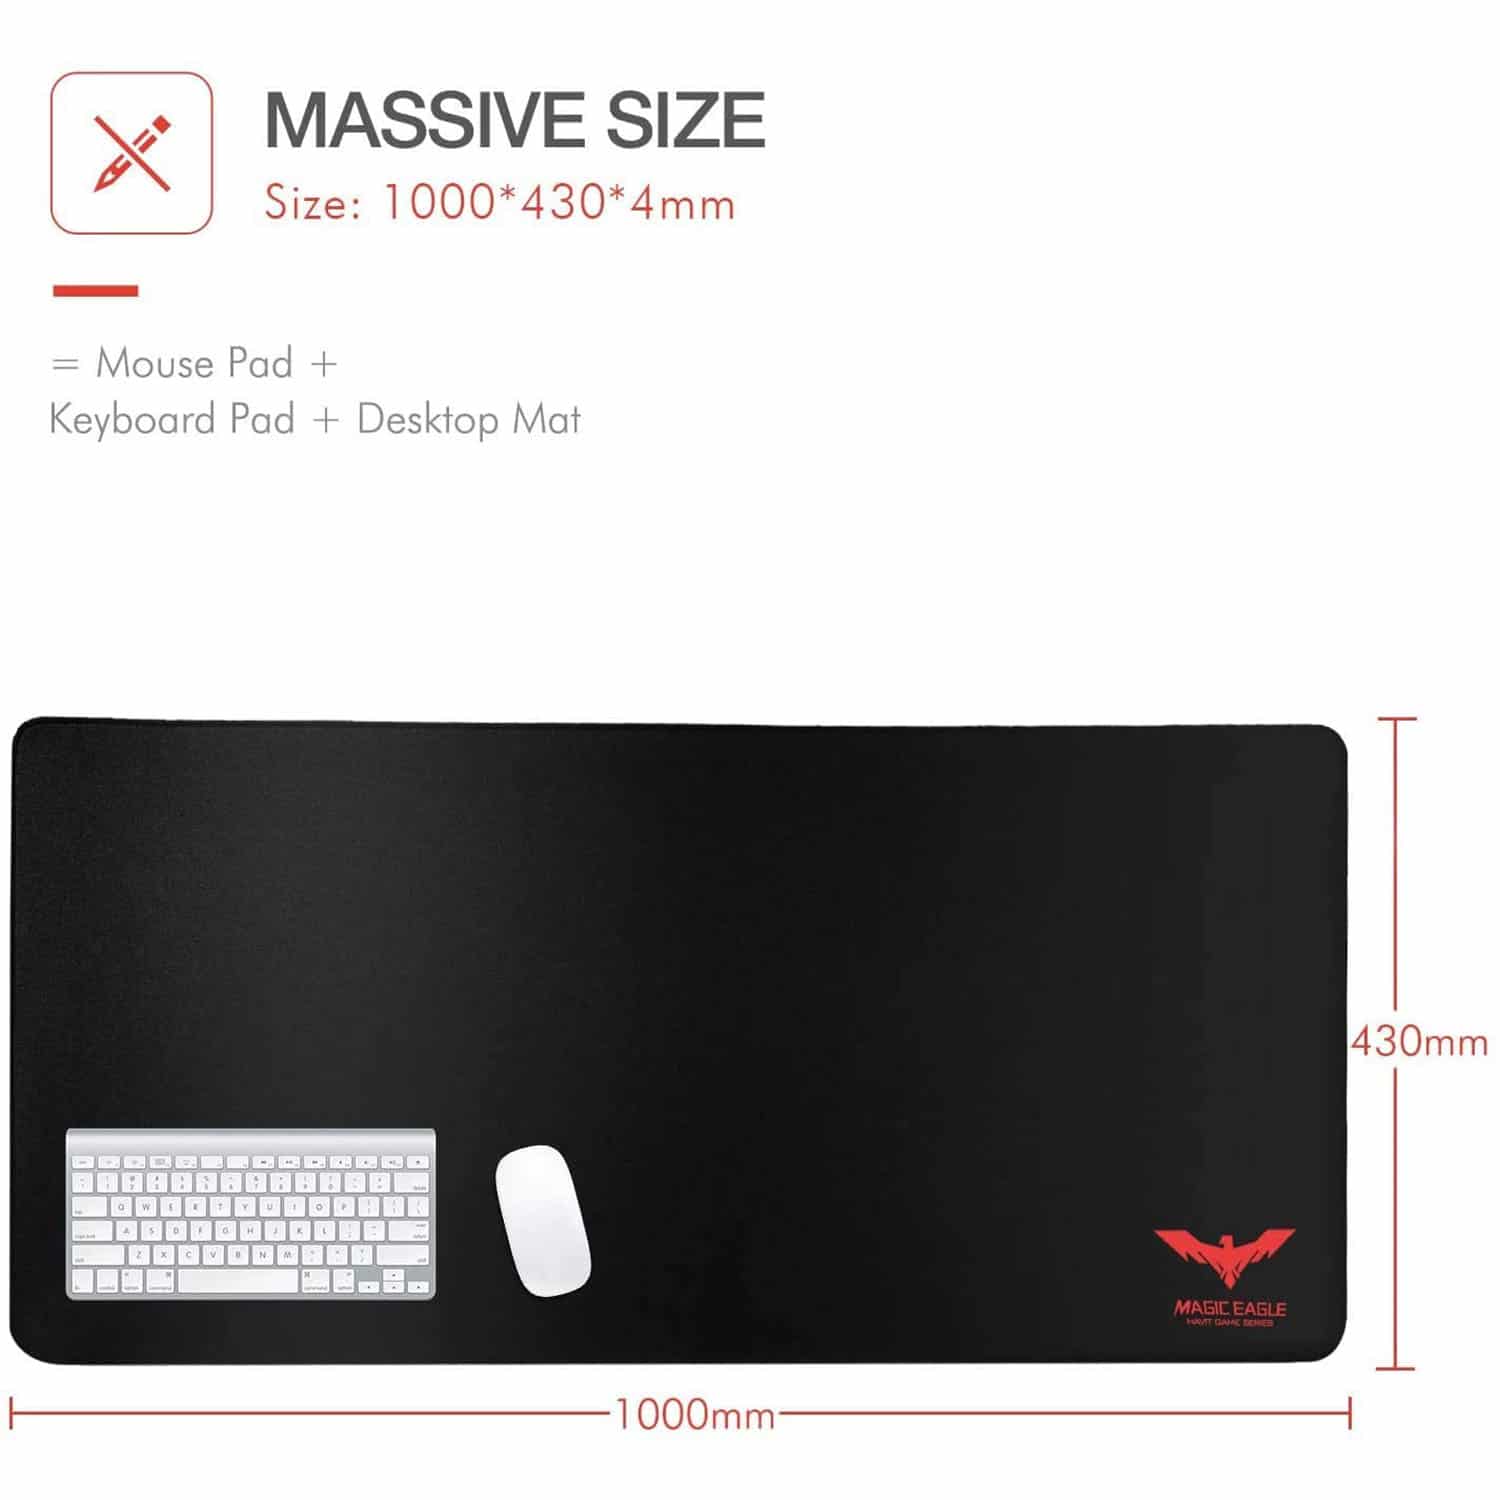 HAVIT MP857 Large Mouse Pad / Mat with Water Resistant & Non-Slip Rubber Base